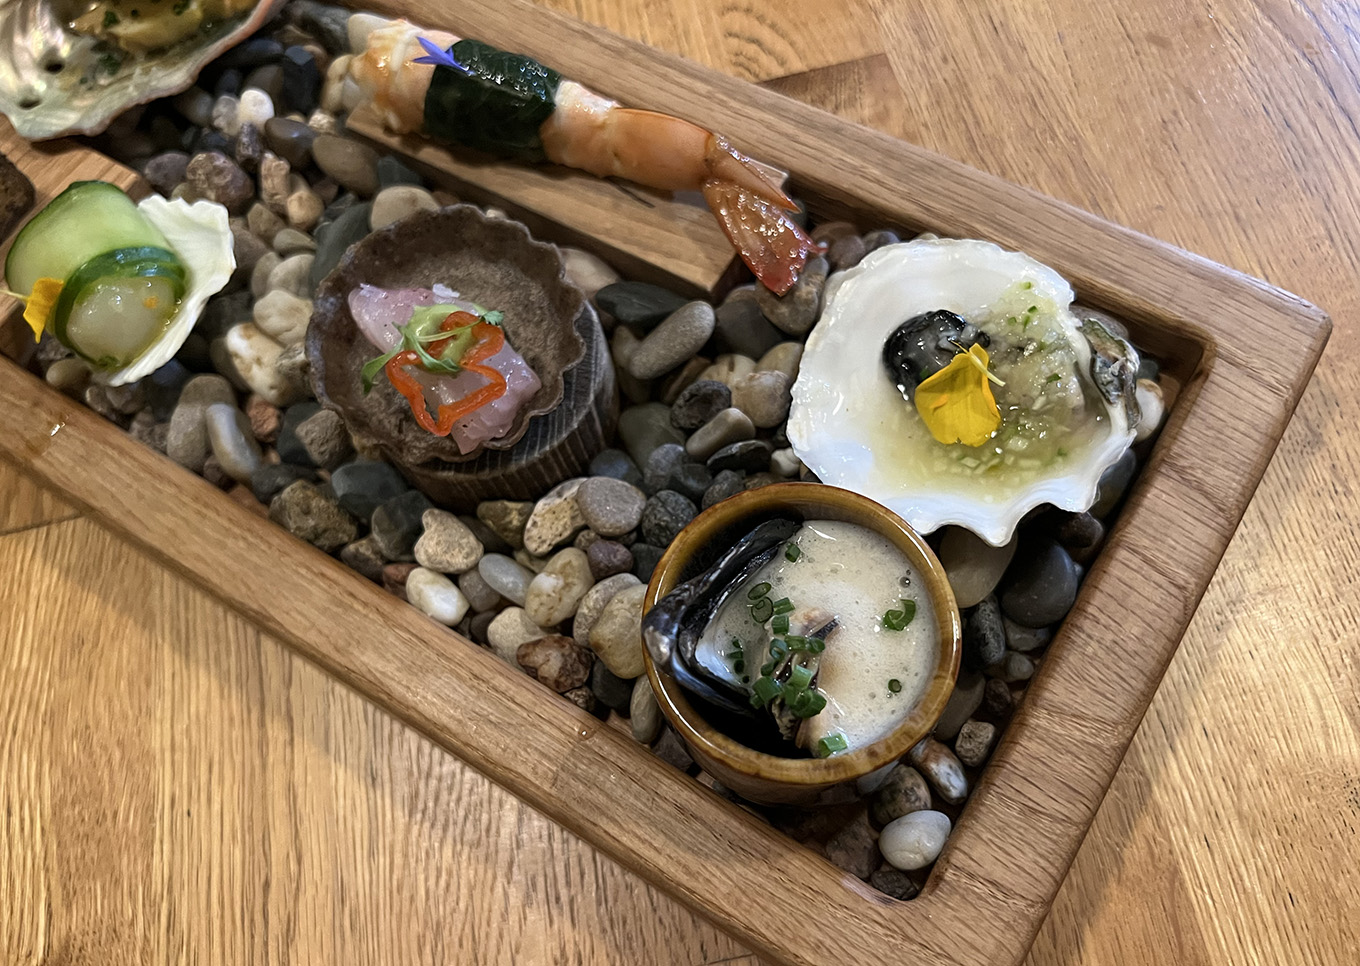 Crowded Beach paired with Tamano Hikari, Bizen Omachi, Junmai Daiginjo at Kali Restaurant in Los Angeles (Photo by Julie Nguyen)